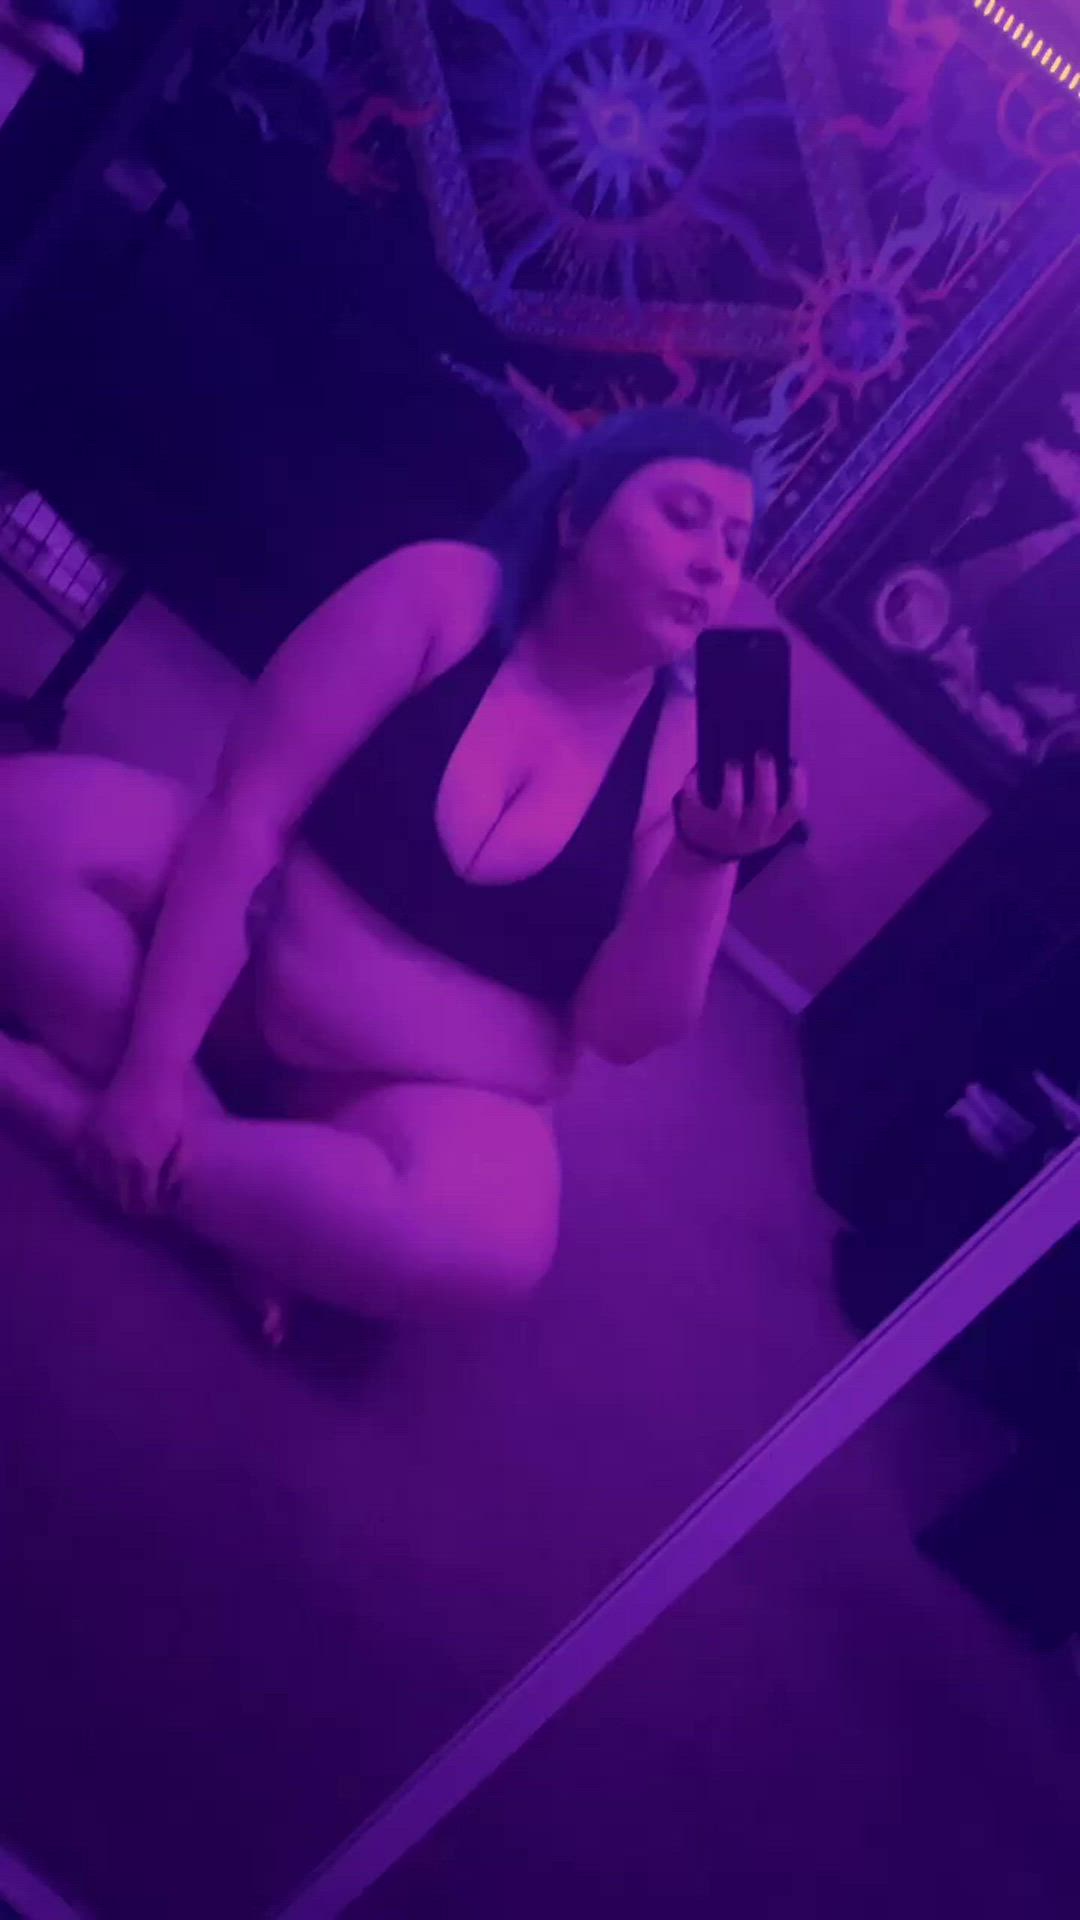 Chubby porn video with onlyfans model domisbomb <strong>@domisbomb</strong>